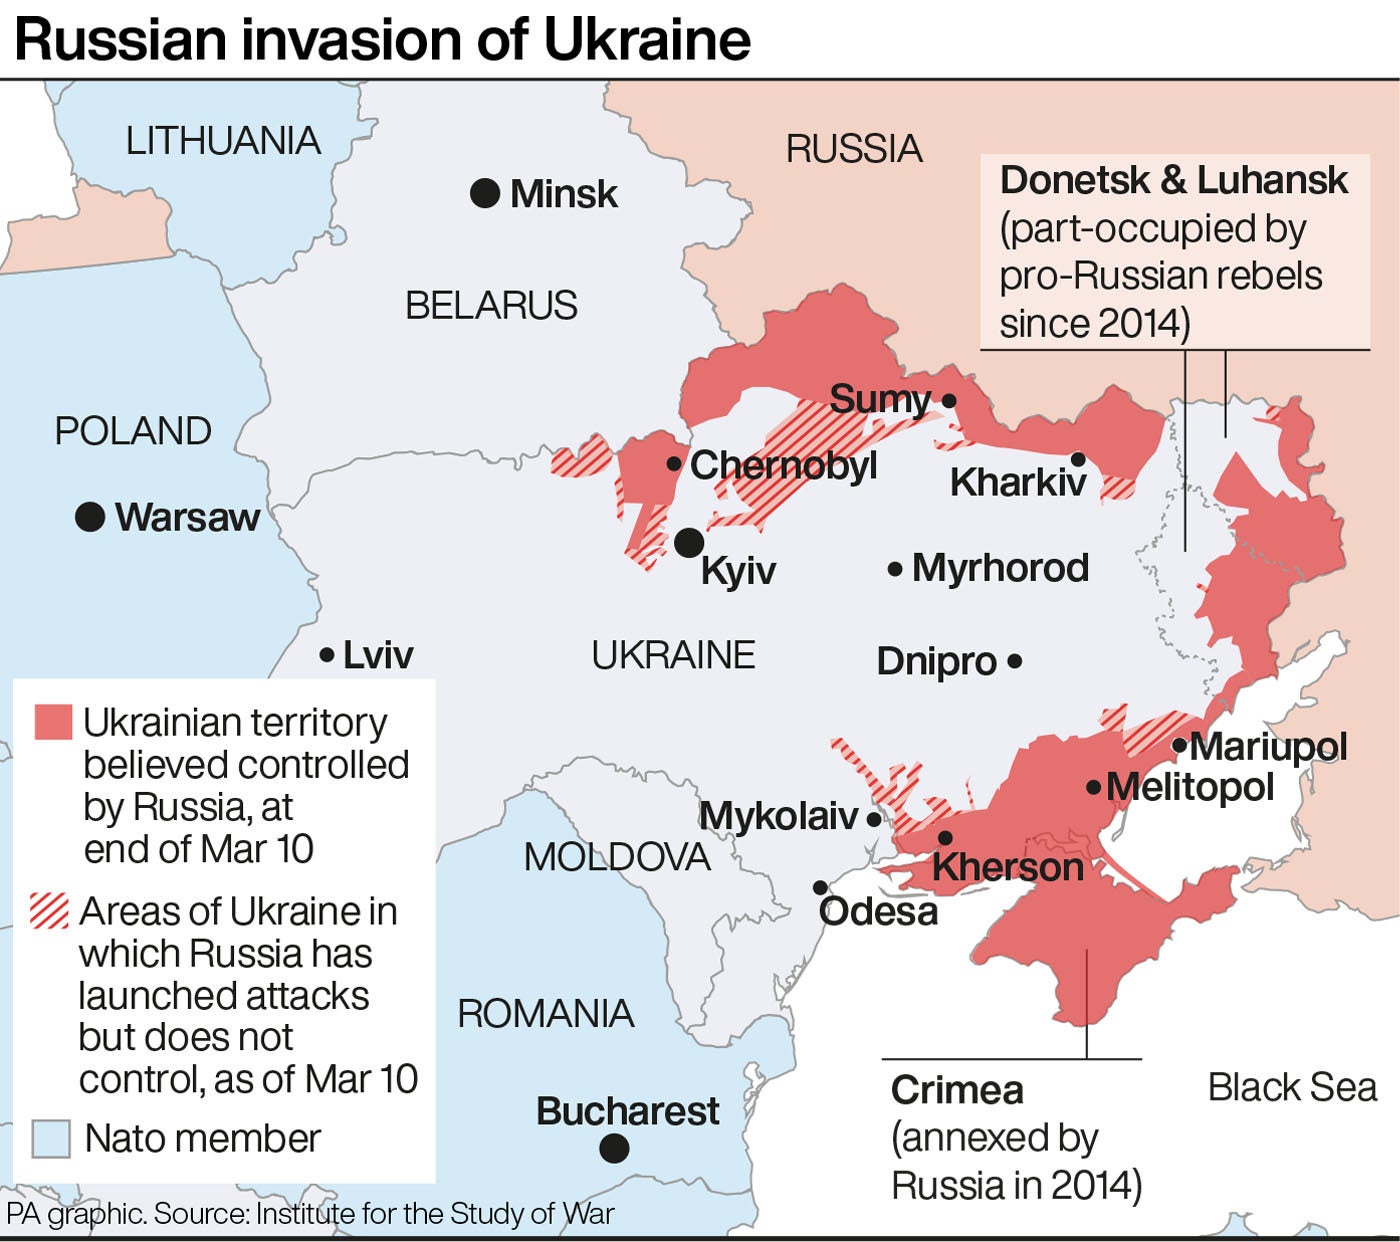 This map shows the extent of Russia’s war in Ukraine